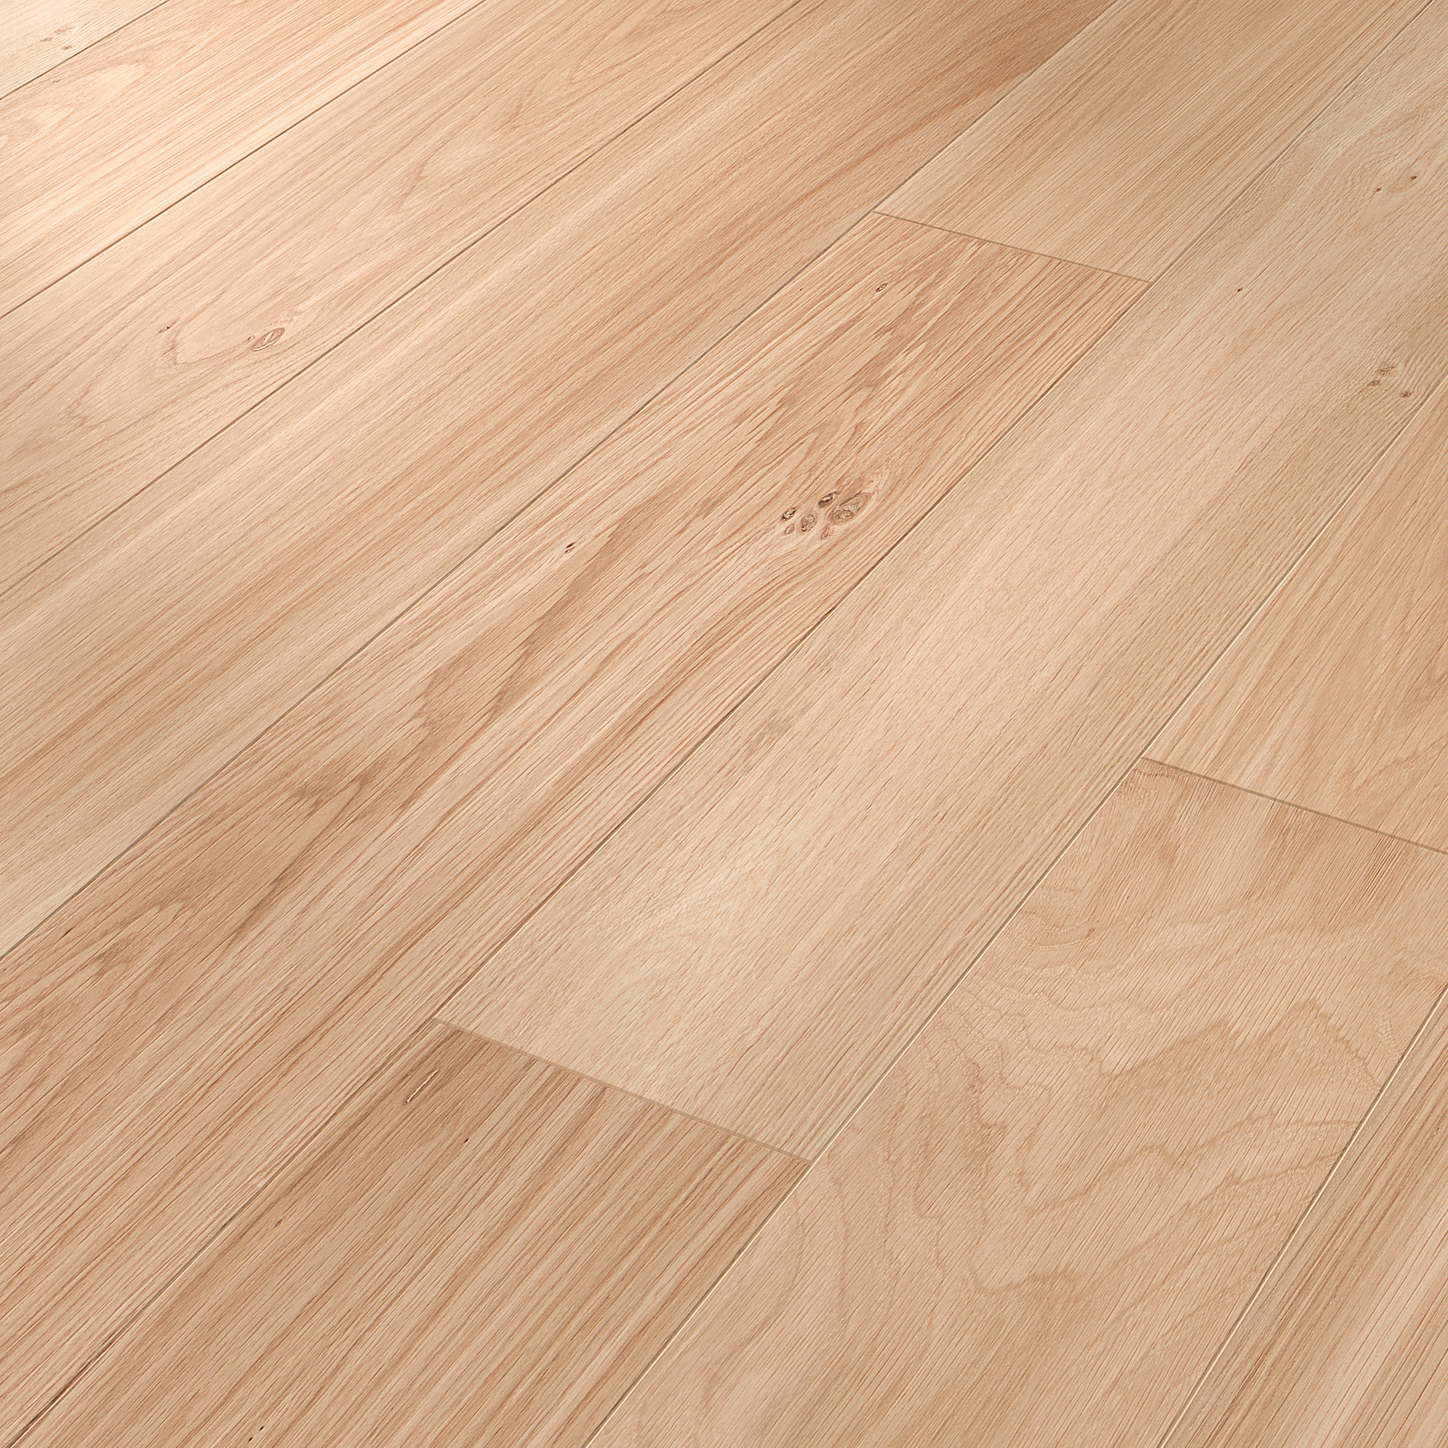 PARAT 20 Oak RB nature raw solid plank